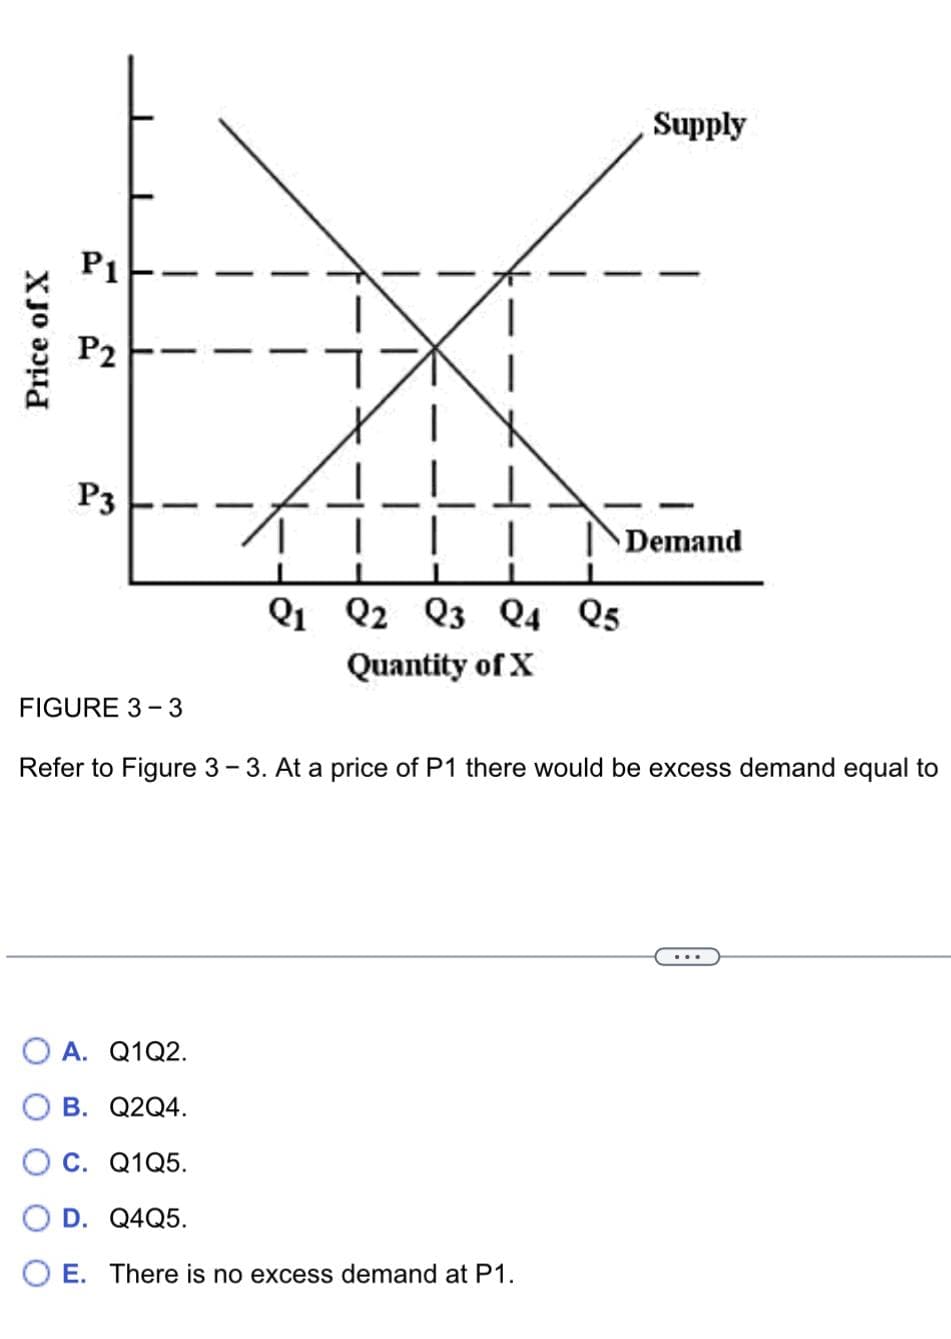 Price of X
P1
P2
P3
1
FIGURE 3-3
Q1
I
1
Q2 Q3 Q4 25
Quantity of X
Supply
O A. Q1Q2.
B. Q2Q4.
C. Q1Q5.
D. Q4Q5.
O E. There is no excess demand at P1.
Demand
Refer to Figure 3-3. At a price of P1 there would be excess demand equal to